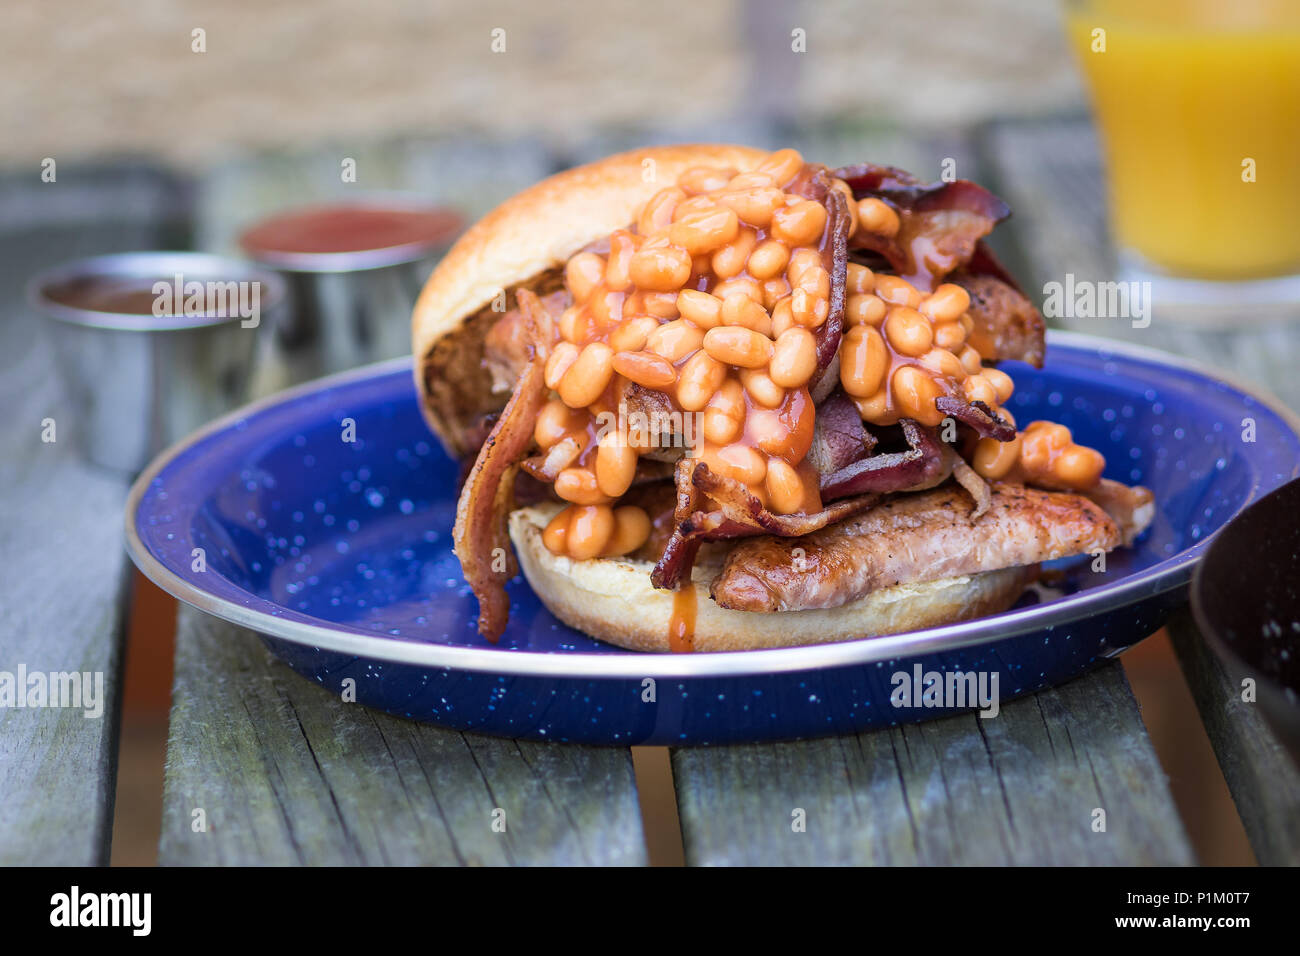 Sausage,Streaky Bacon & Baked Beans served in a brioche bun for breakfast Stock Photo